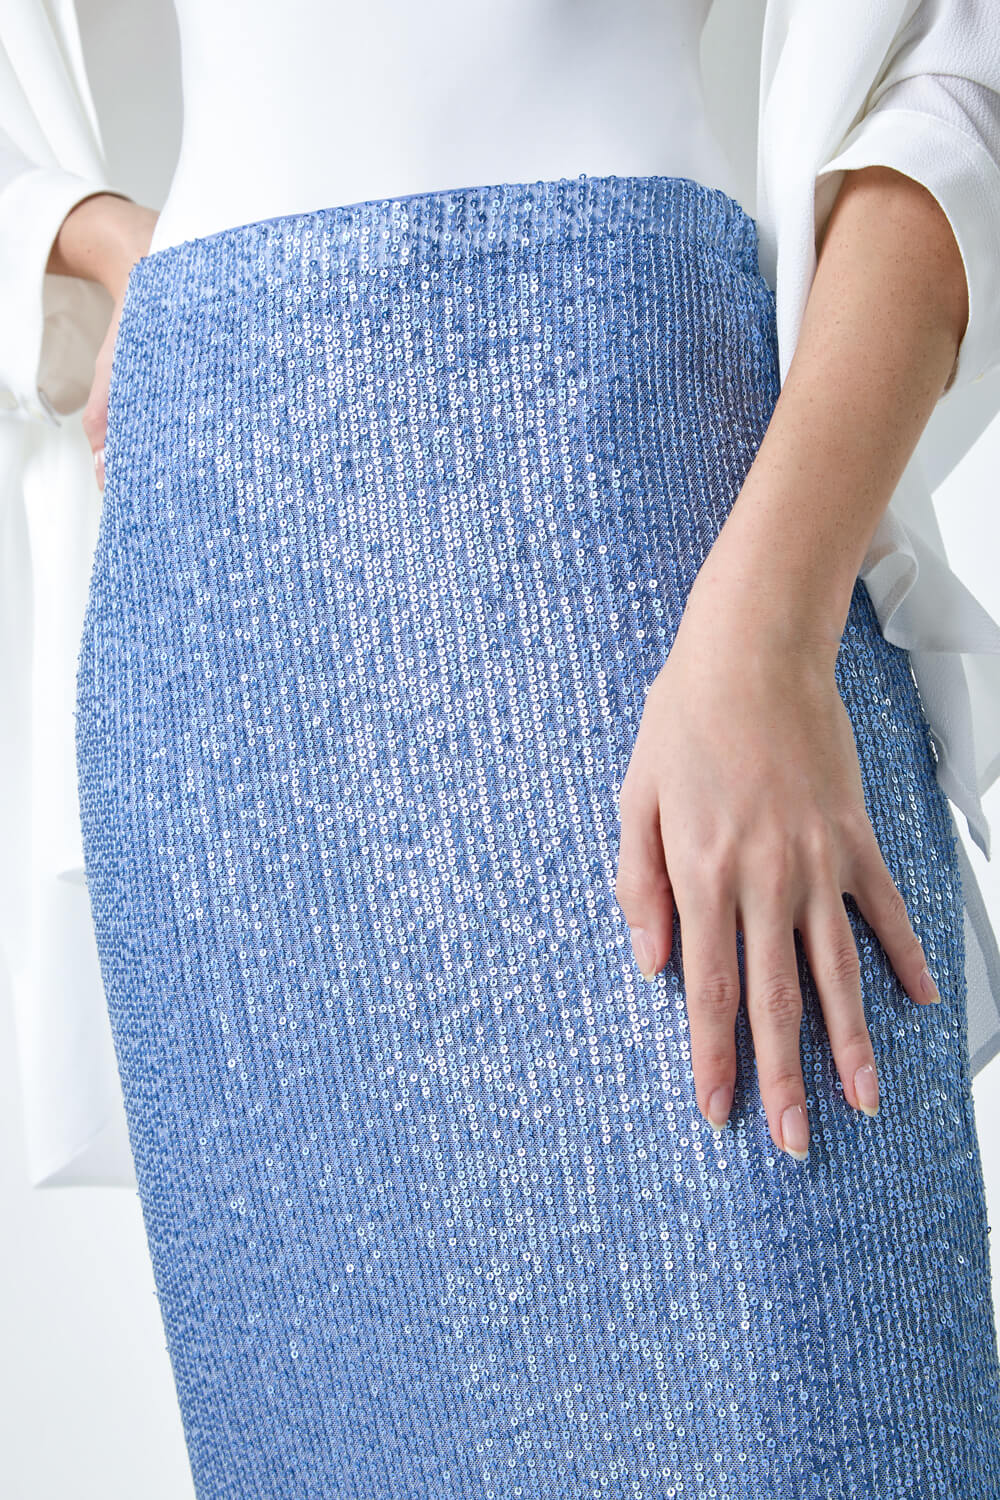 Steel Blue Sequin Sparkle Stretch Midi Skirt, Image 5 of 5